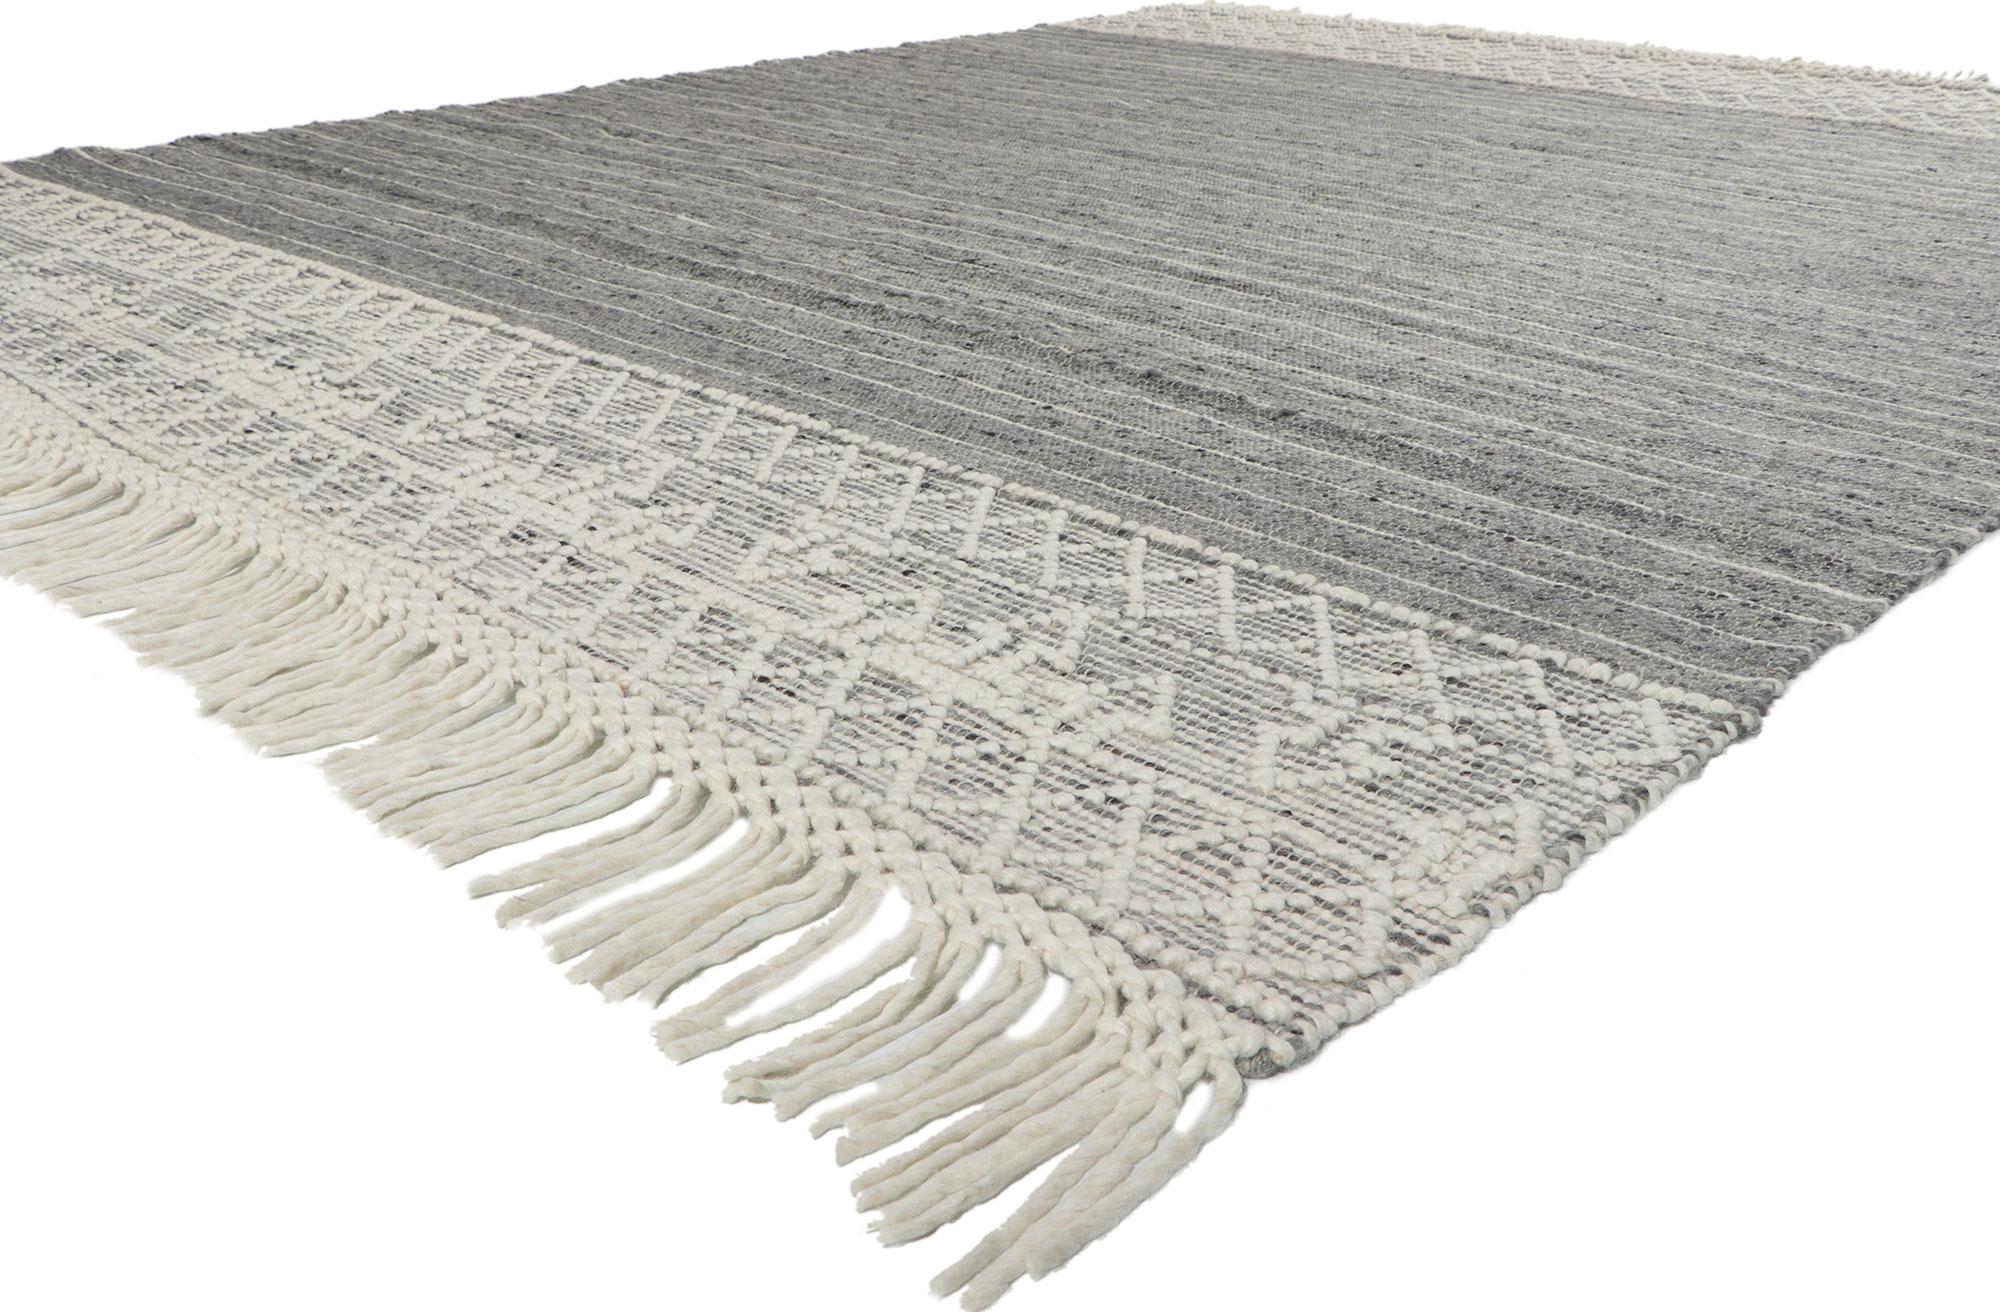 30903 New Handwoven Textured Jute Rug, 09'04 x 11'09. ?Emanating refined boho style with incredible detail and texture, this handwoven jute rug is a captivating vision of woven beauty. The pinstripe pattern and achromatic colorway woven into this